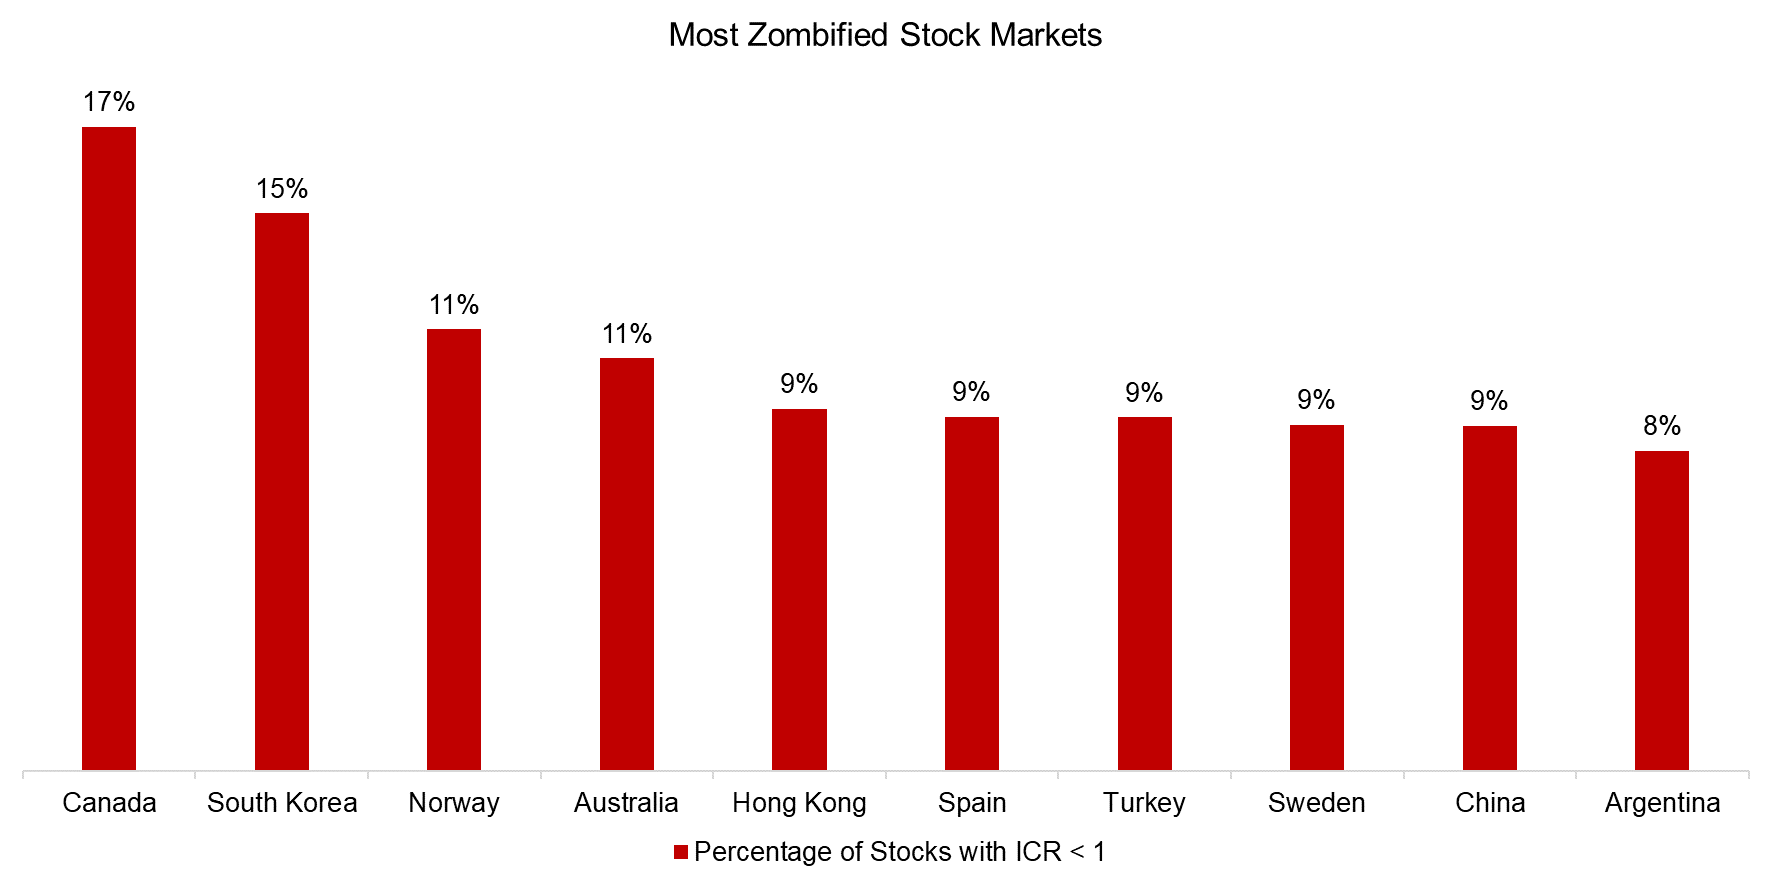 Most Zombified Stock Markets